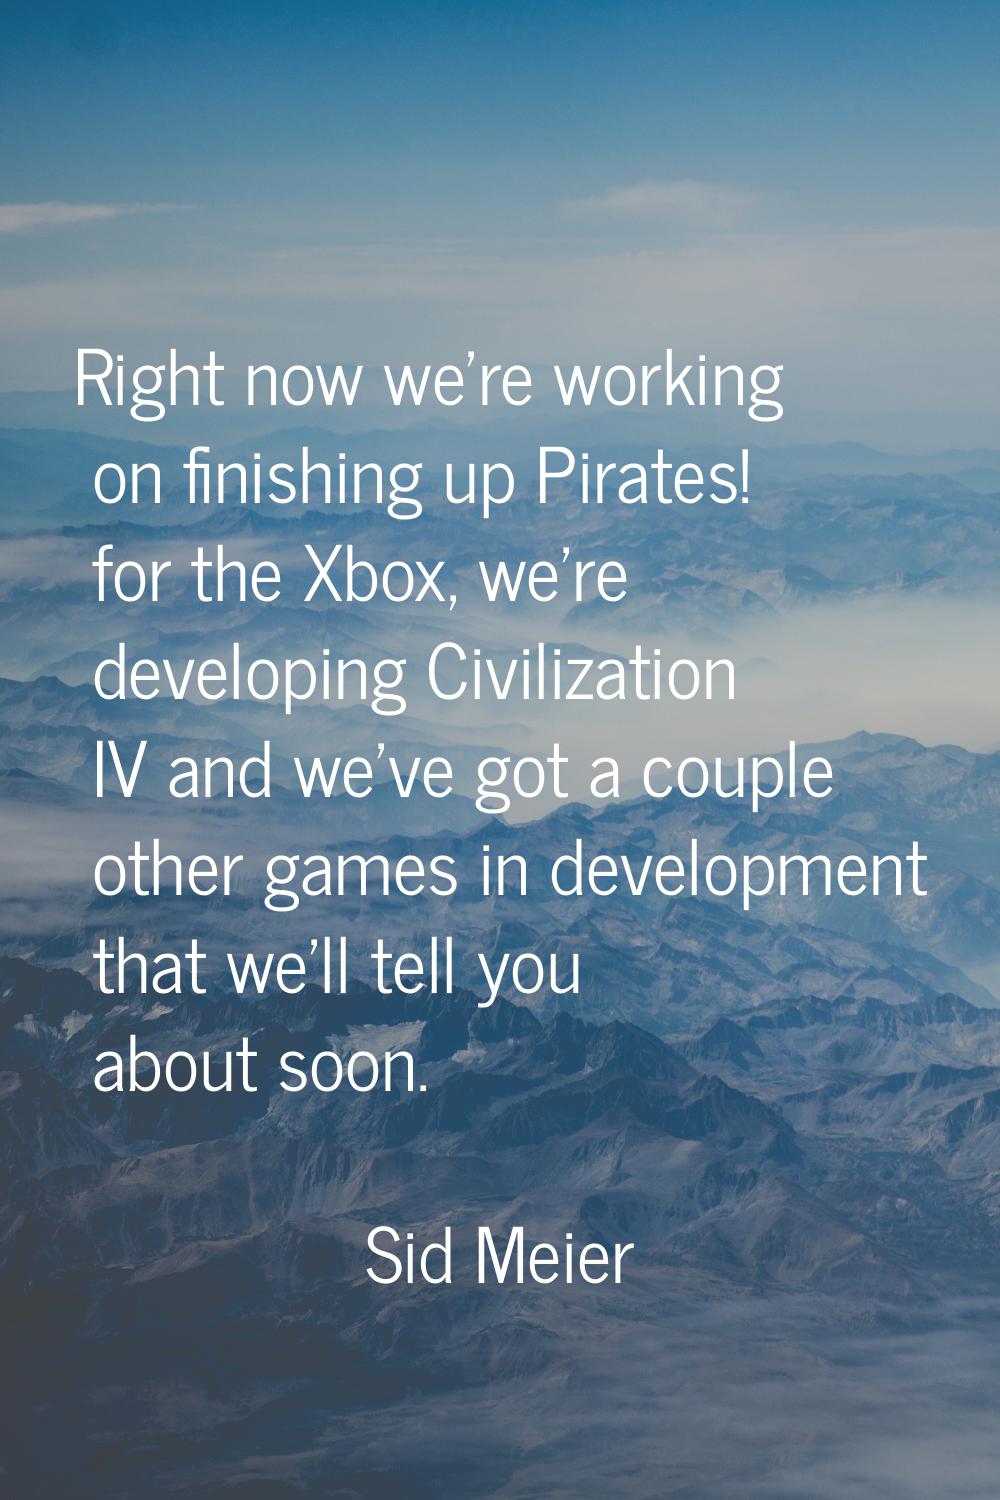 Right now we're working on finishing up Pirates! for the Xbox, we're developing Civilization IV and